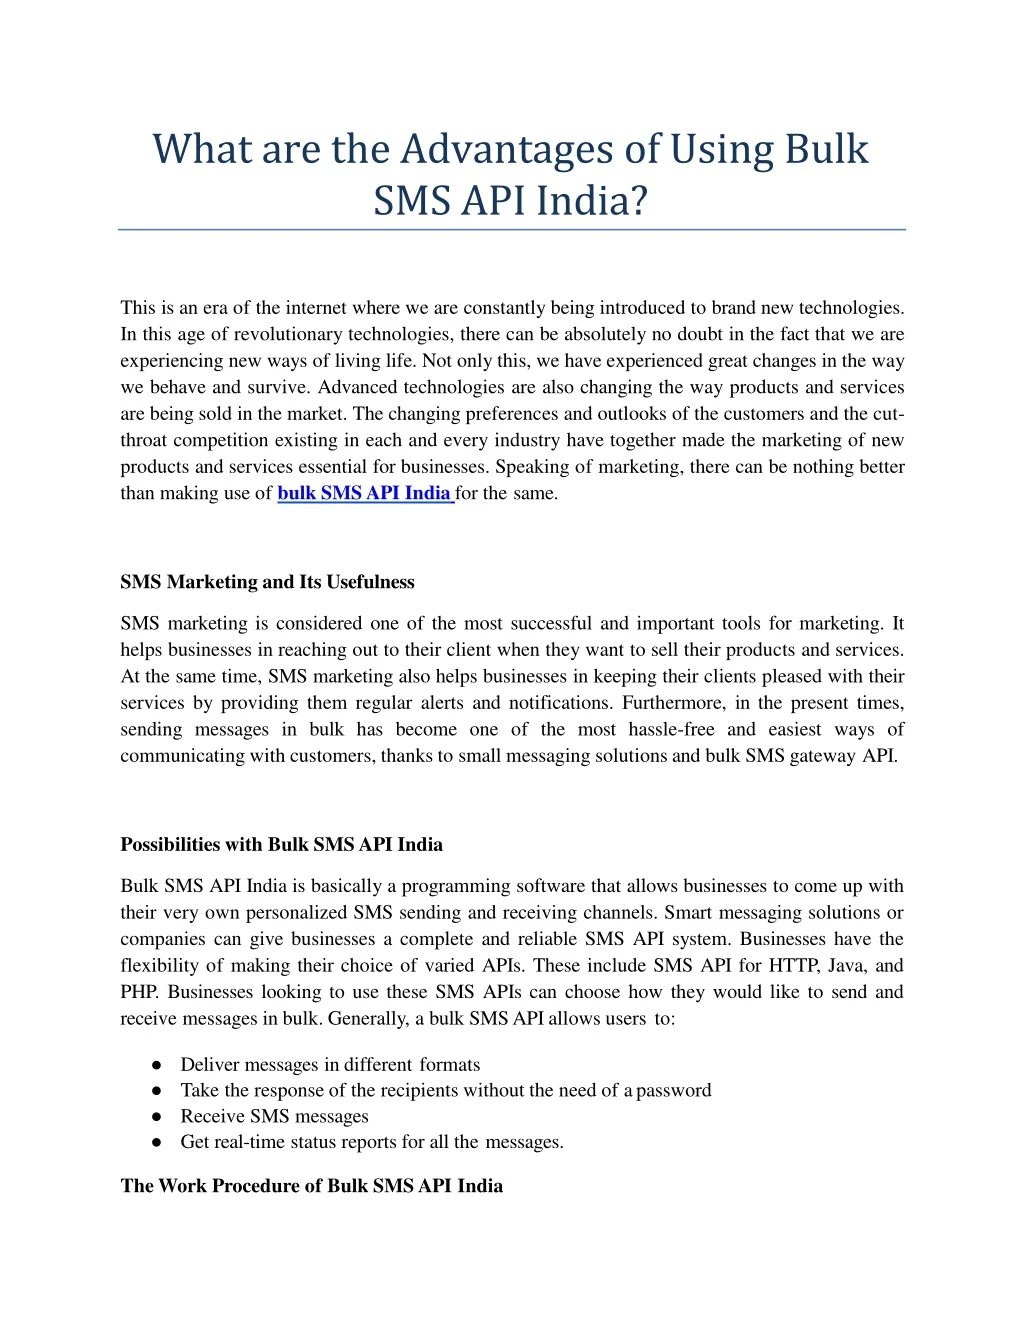 what are the advantages of using bulk sms api india